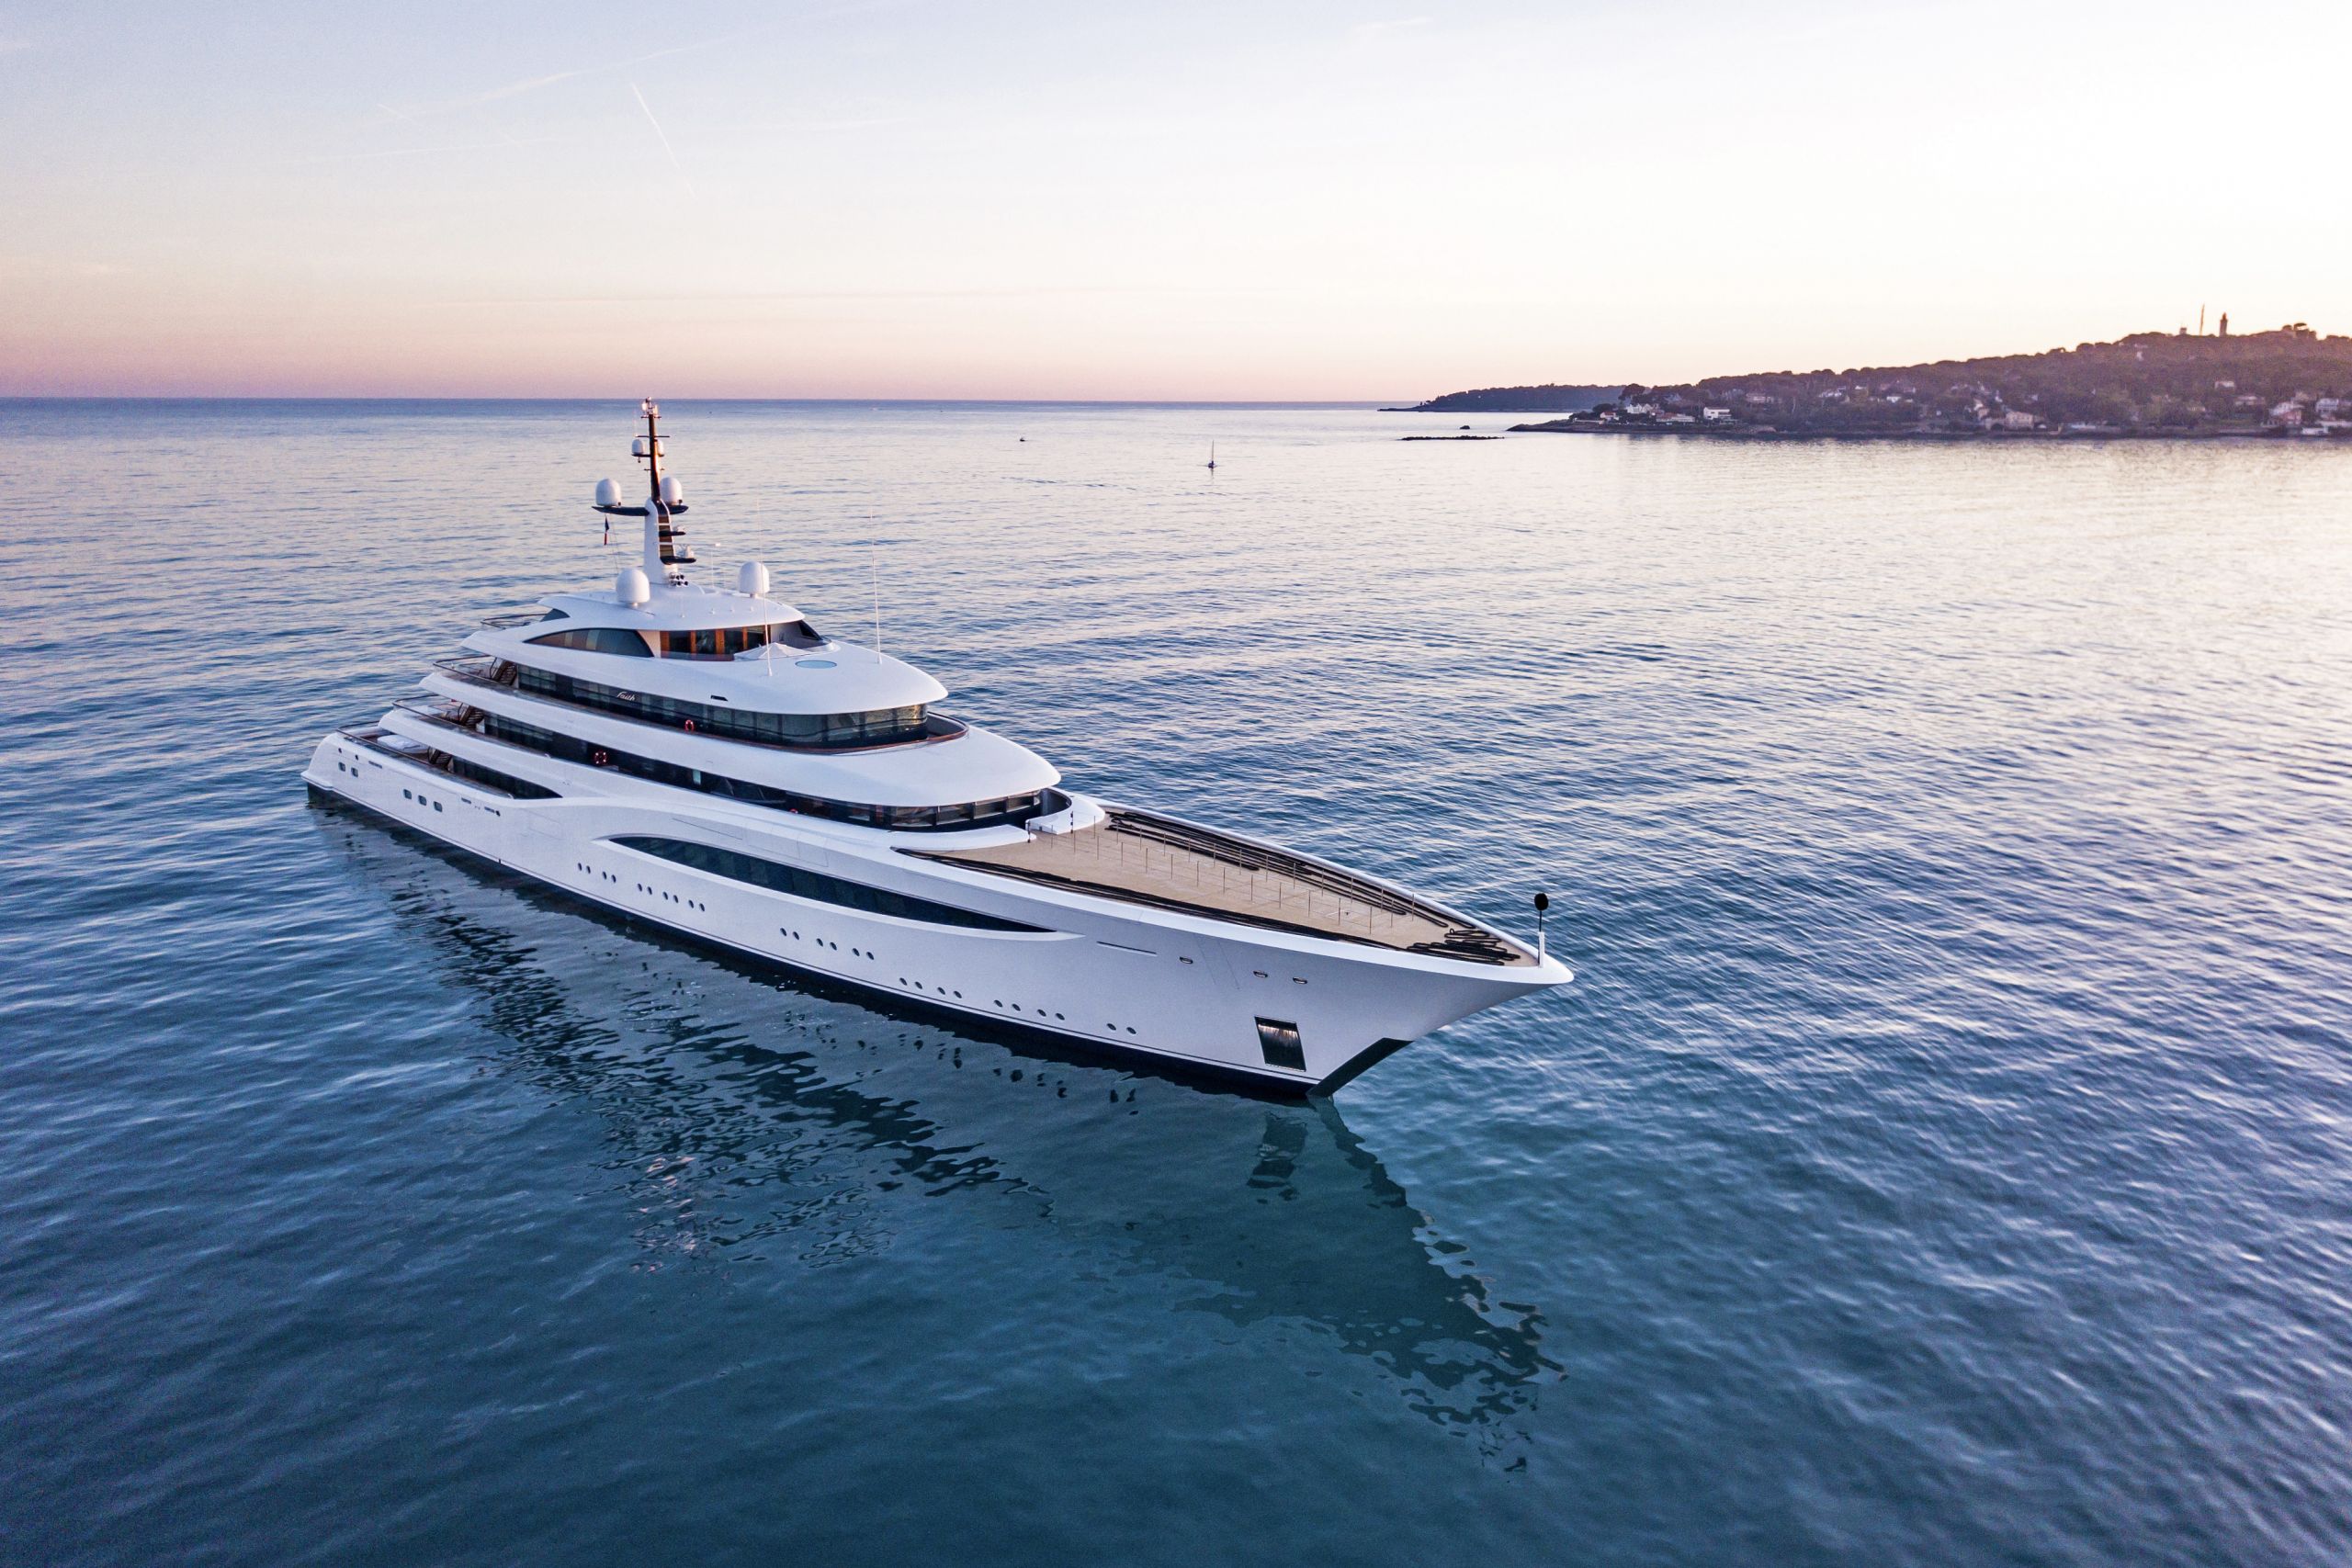 THE FRENCH BILLIONAIRE YACHT OWNED BY BERNARD ARNAULT IS IN